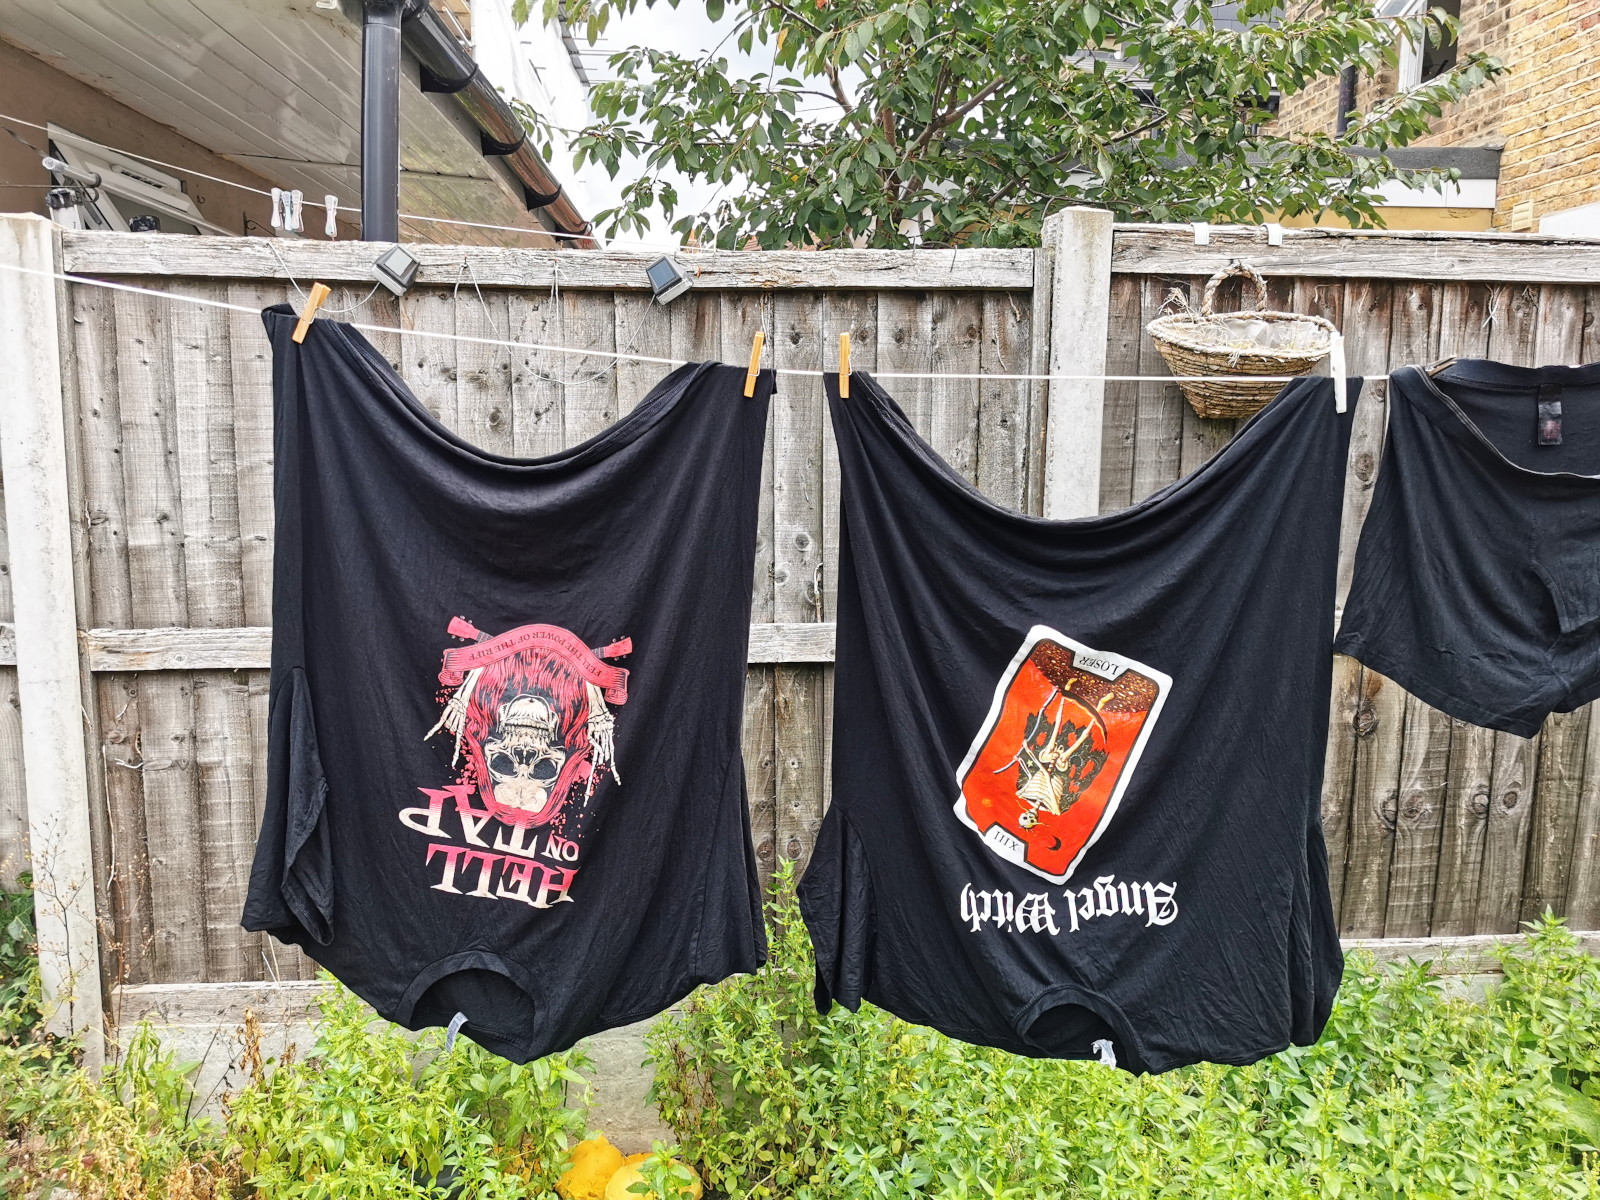 t-shirts
                                  drying on the line